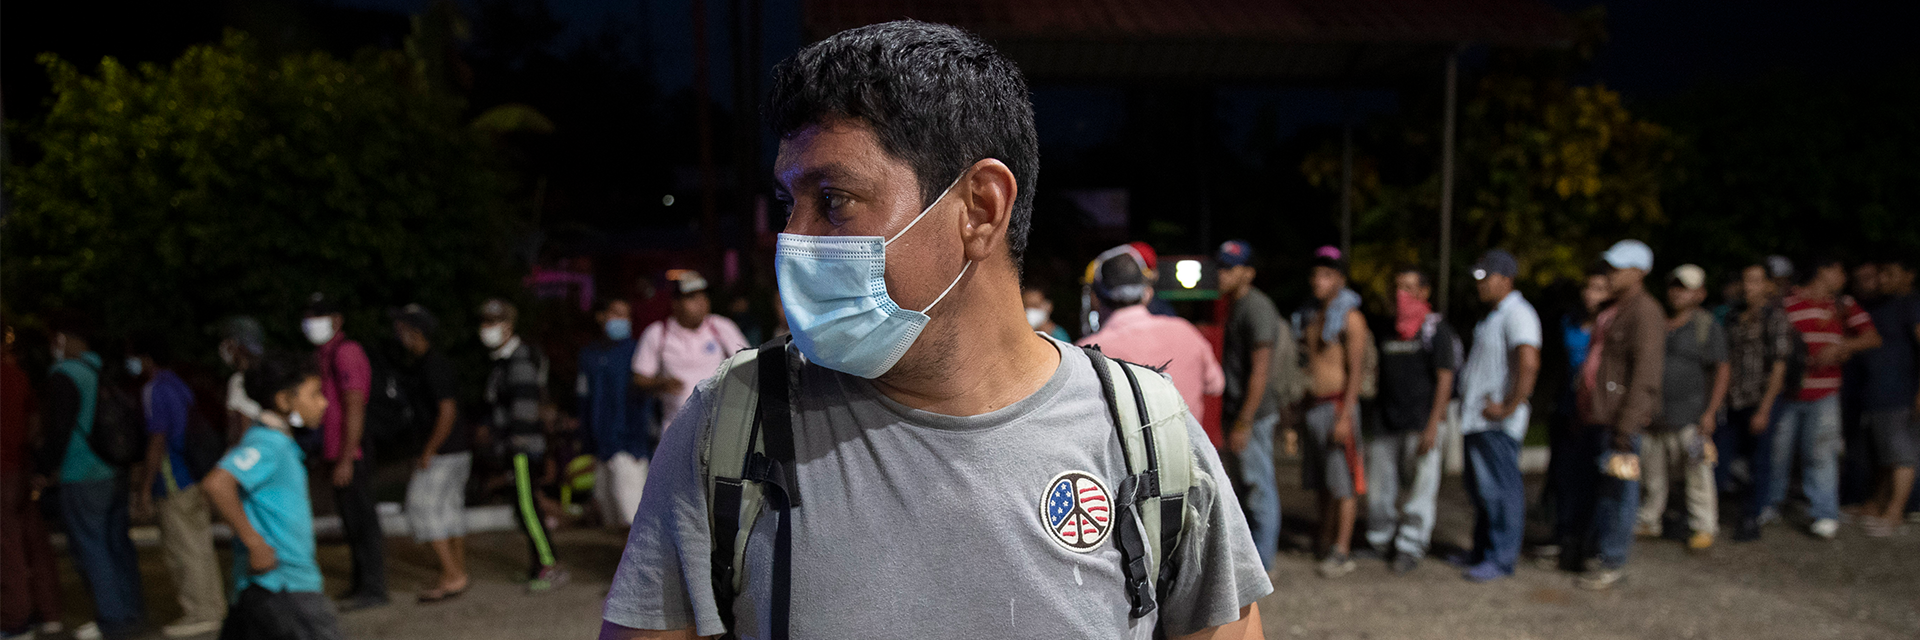 Centered and in front: a migrant at a gas station/food mart in Morales, Guatamela; more migrants in the background